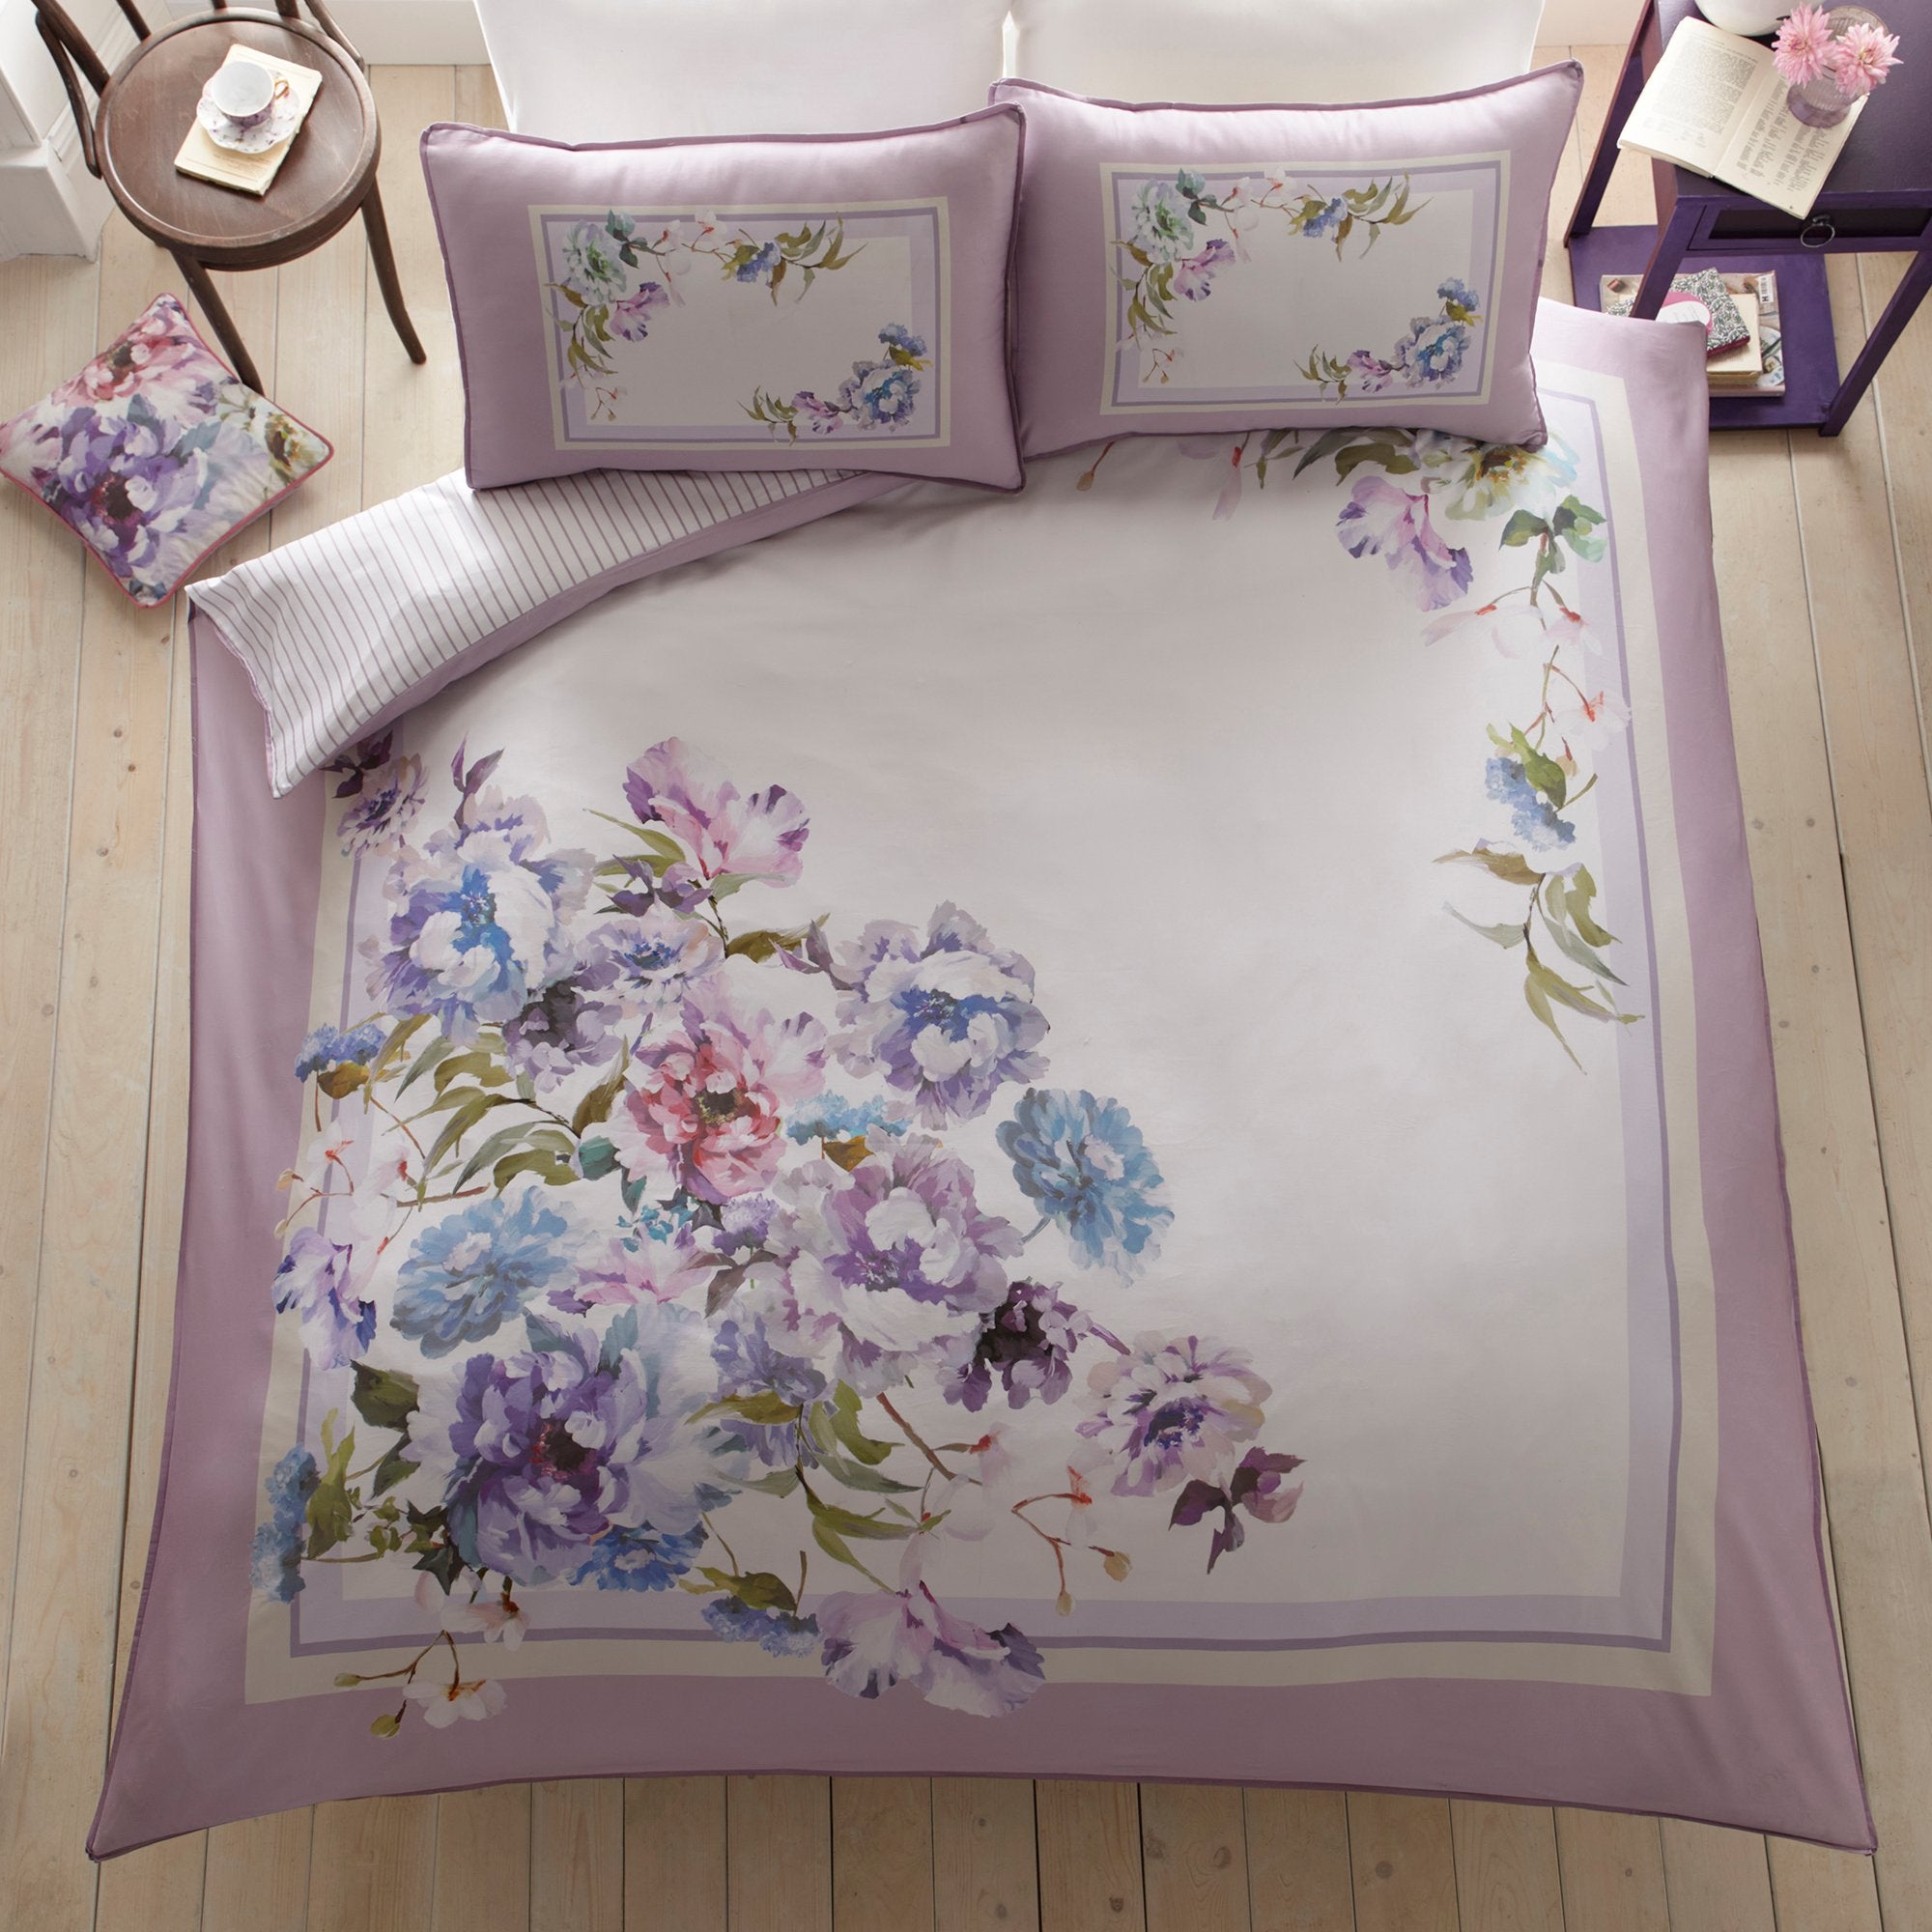 Duvet Cover Set Arley by Appletree Heritage in Mauve